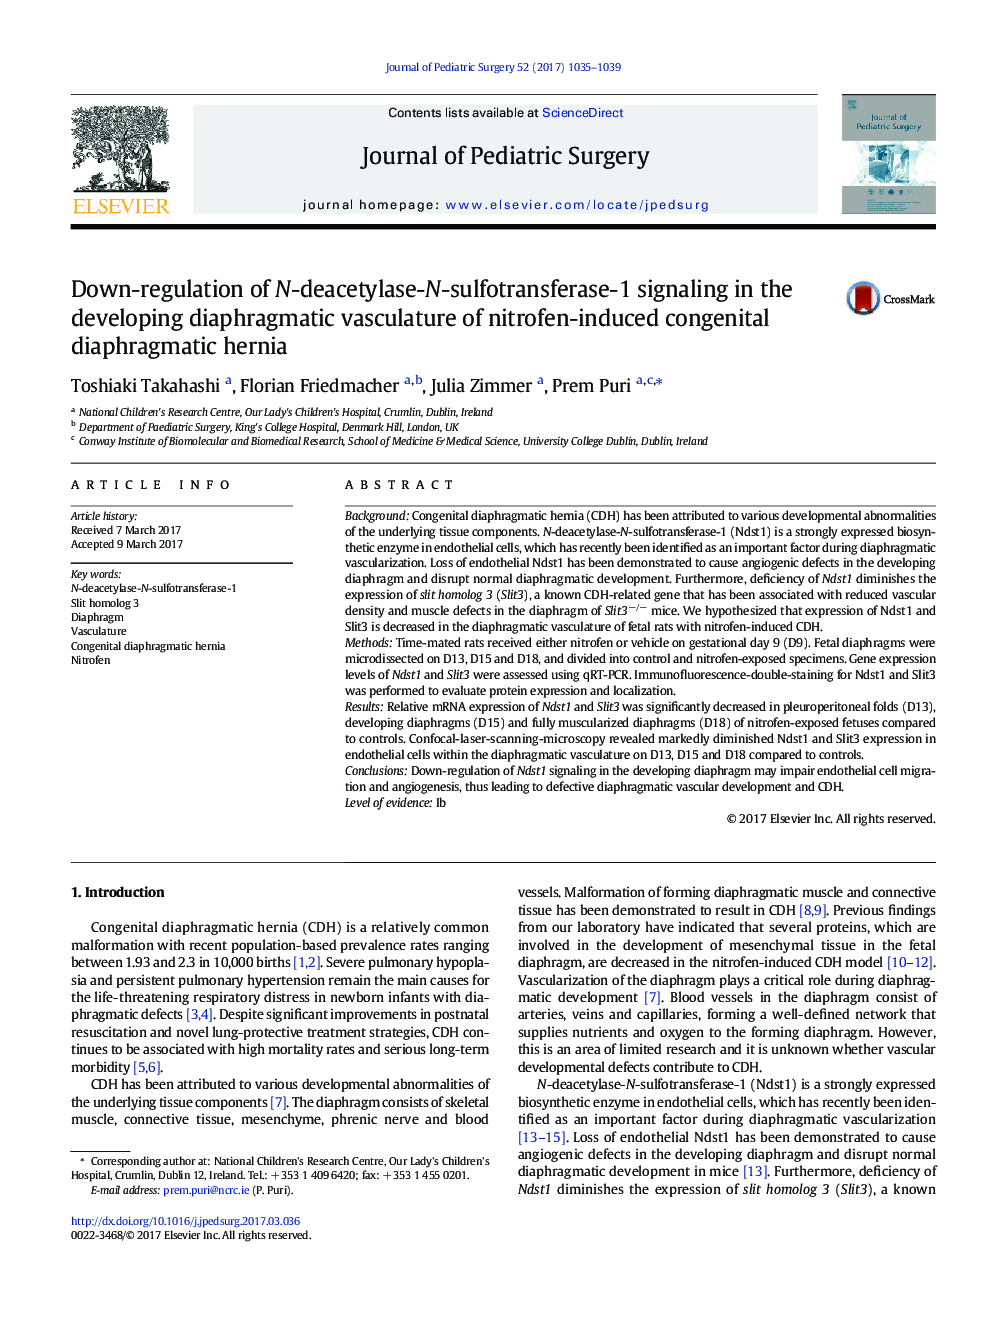 Basic Science PapersDown-regulation of N-deacetylase-N-sulfotransferase-1 signaling in the developing diaphragmatic vasculature of nitrofen-induced congenital diaphragmatic hernia